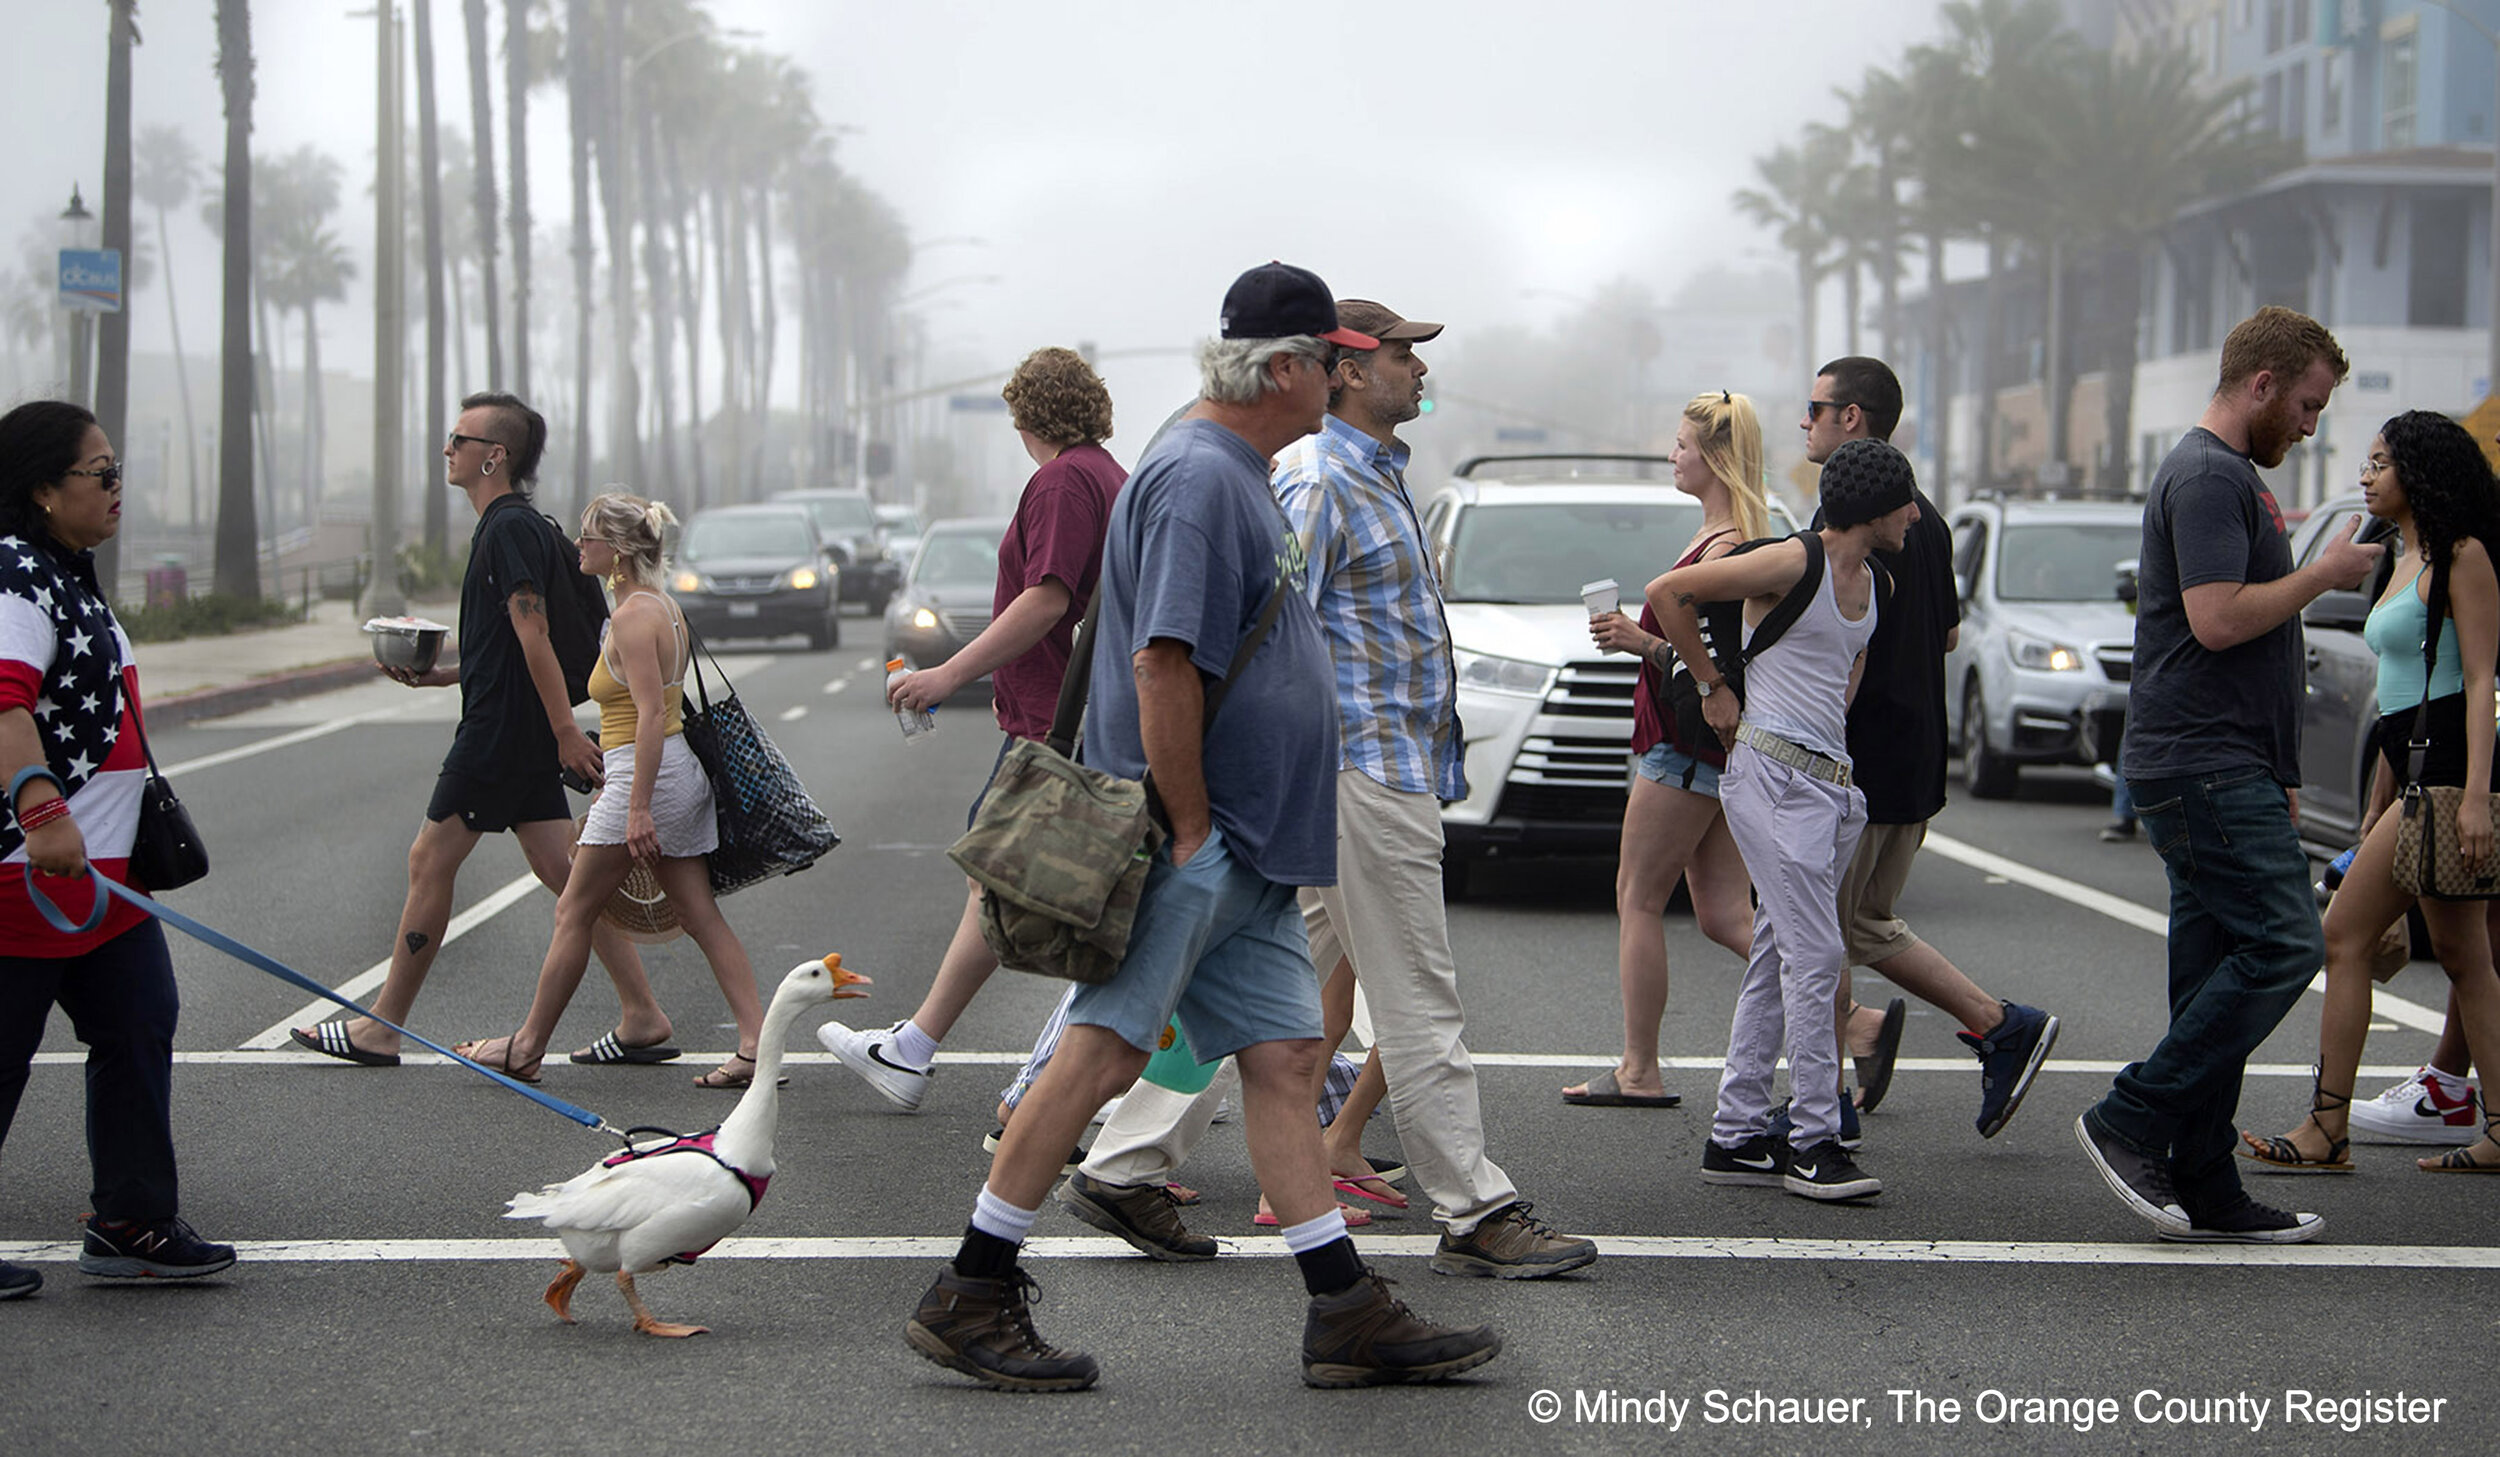  Goosey crosses the street to get to the other side with owners  Psyche Lynch, left, and Tom, center, in a crowded downtown Huntington Beach on Sunday, April 26, 2020.  